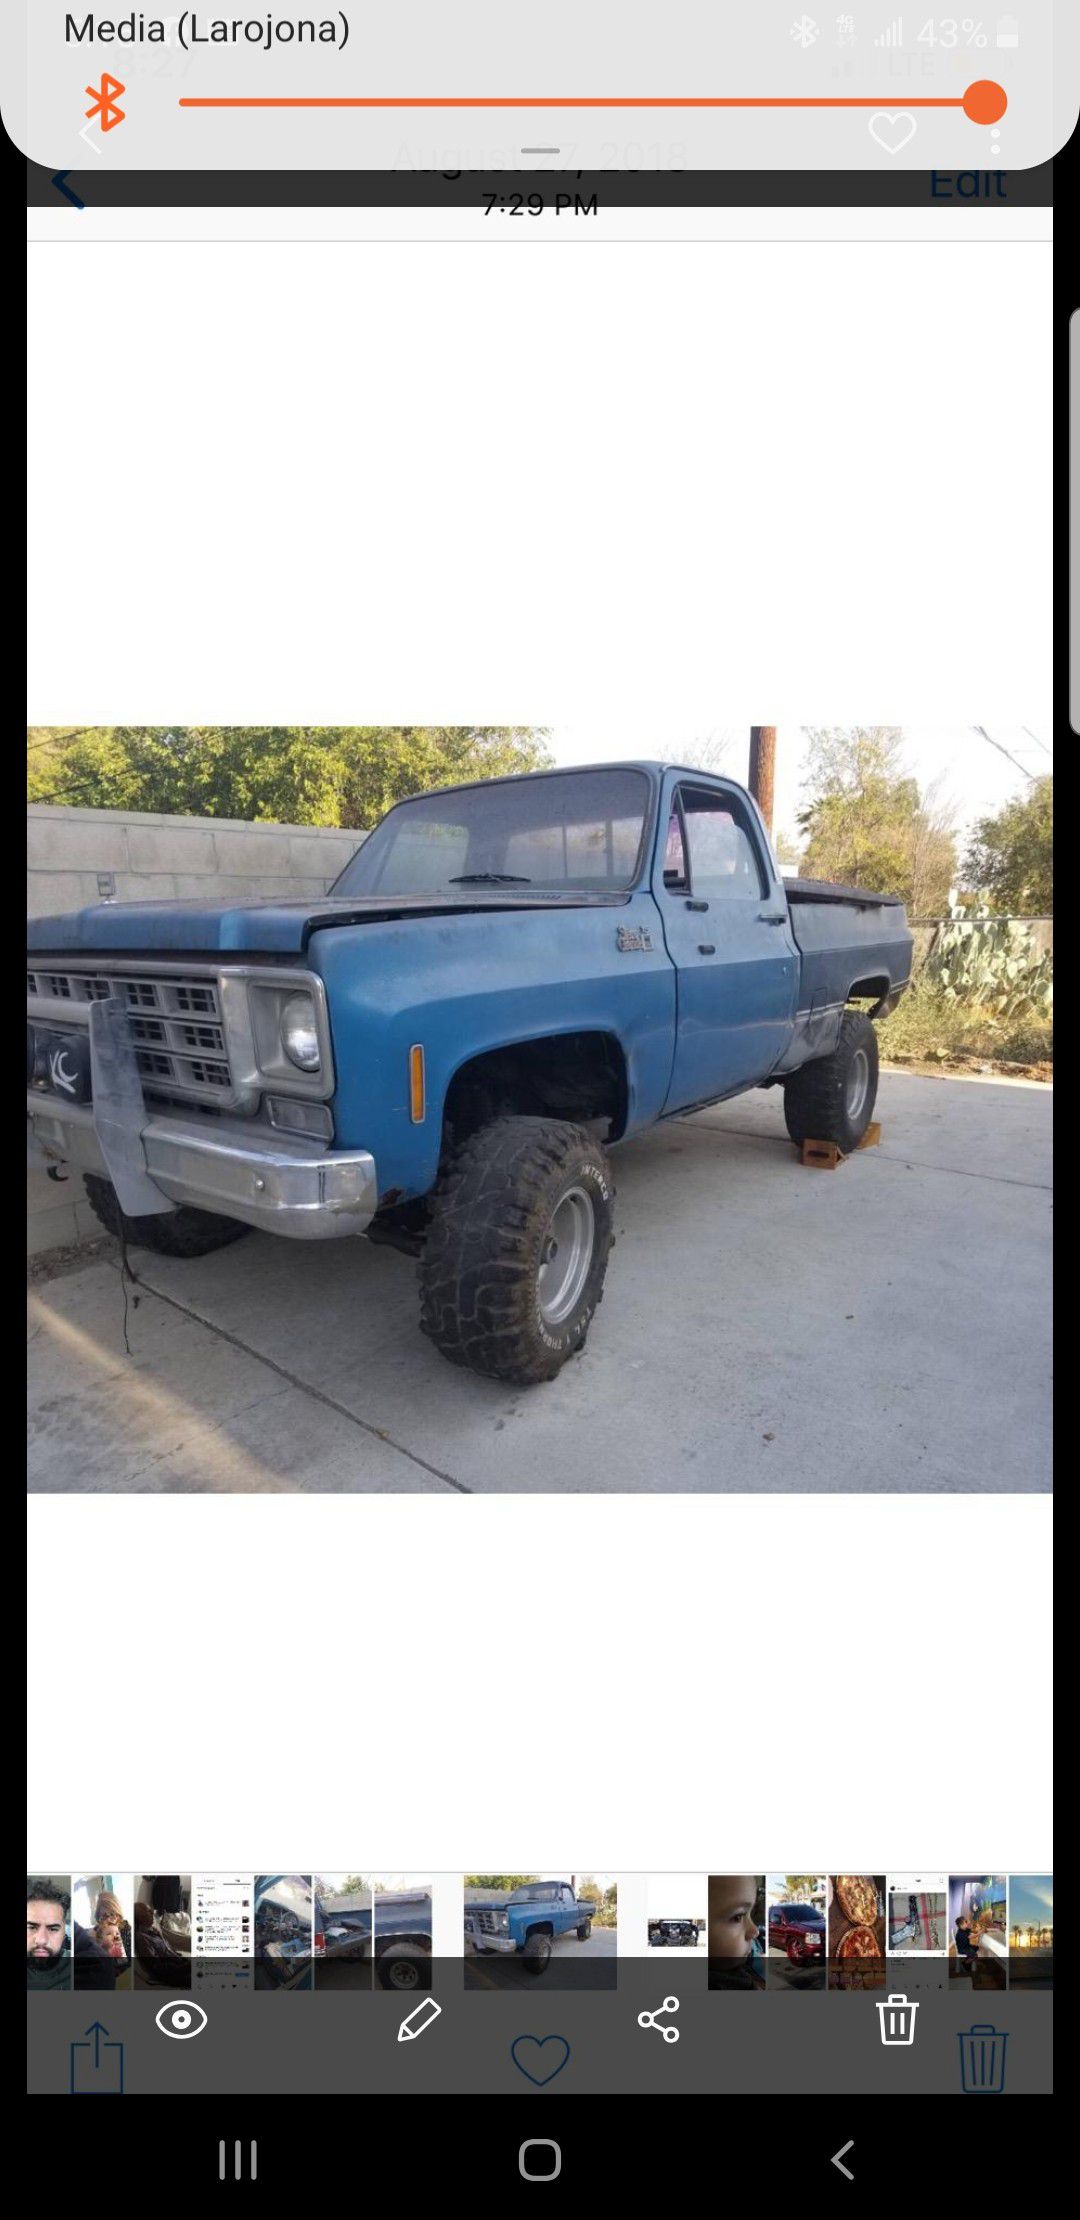 1978 gmc short bed parts or take complete 5.3 ls engine